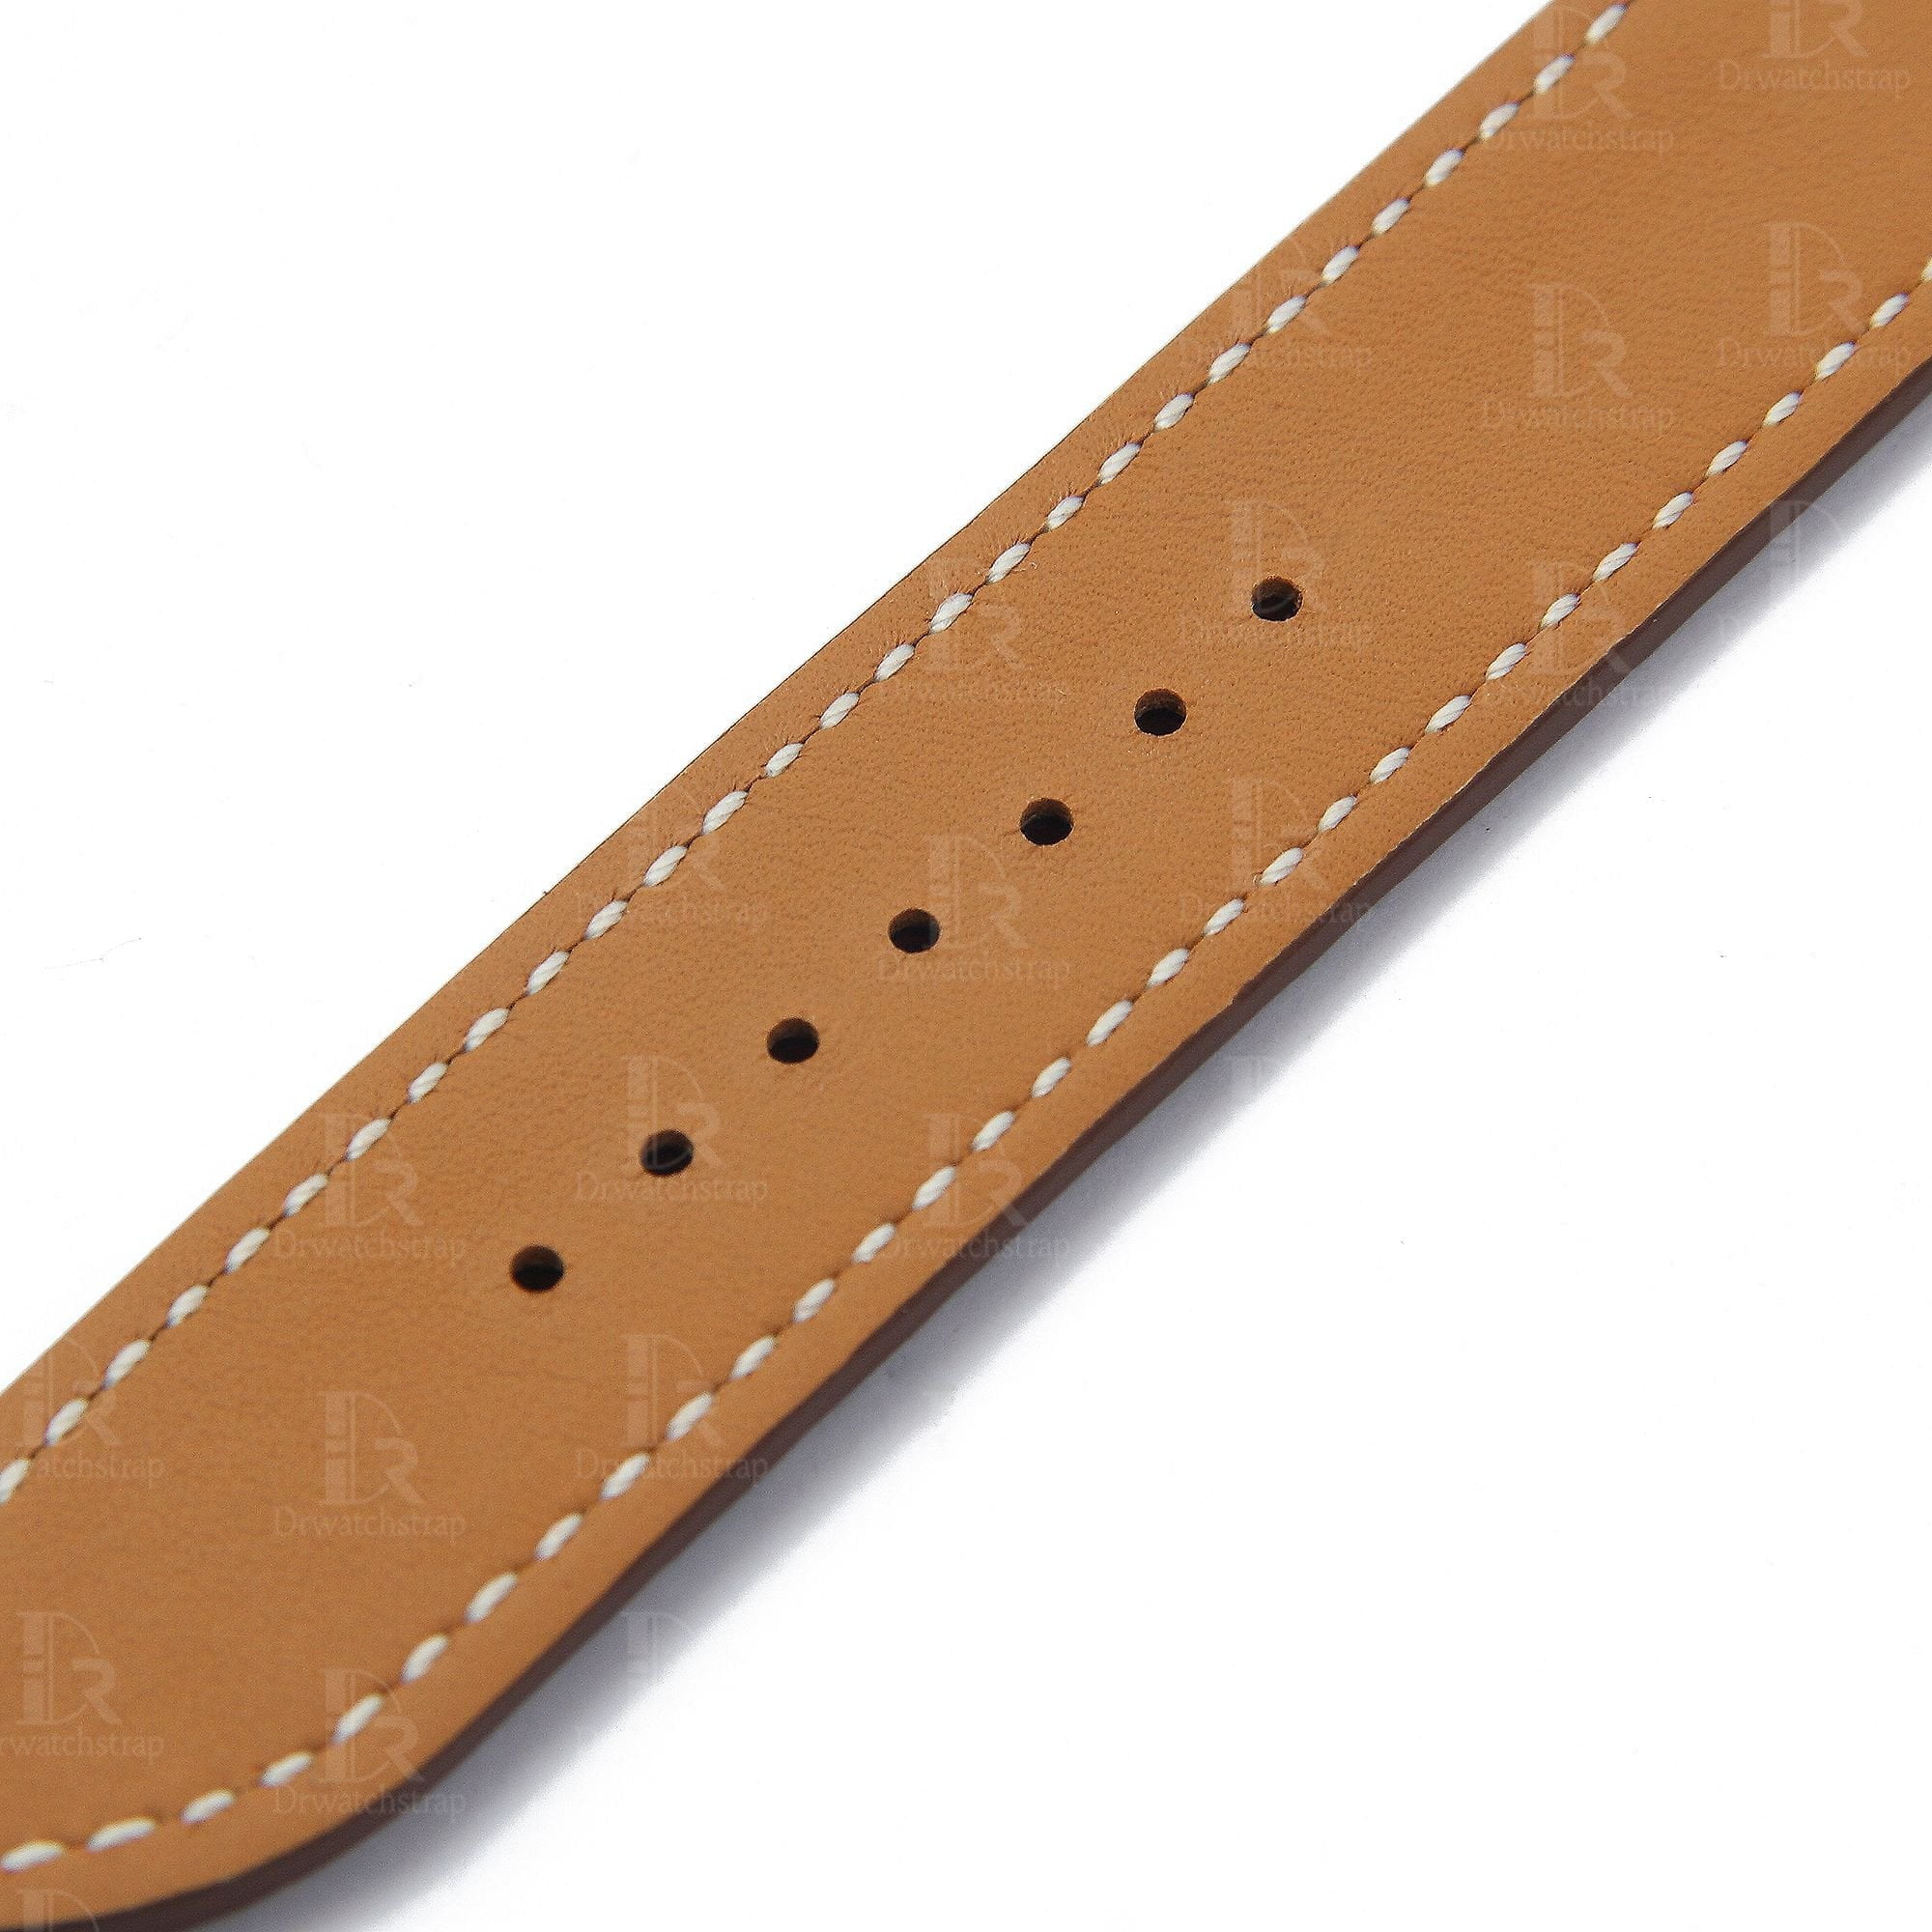 Handmade best quality alligator crocodile brown round-scale leather Hermes watch band and watch strap Double tour replacement for sale - double wrap watch band online for Hermes Heure H Cape COD Arceau luxury watches 38mm 44mm